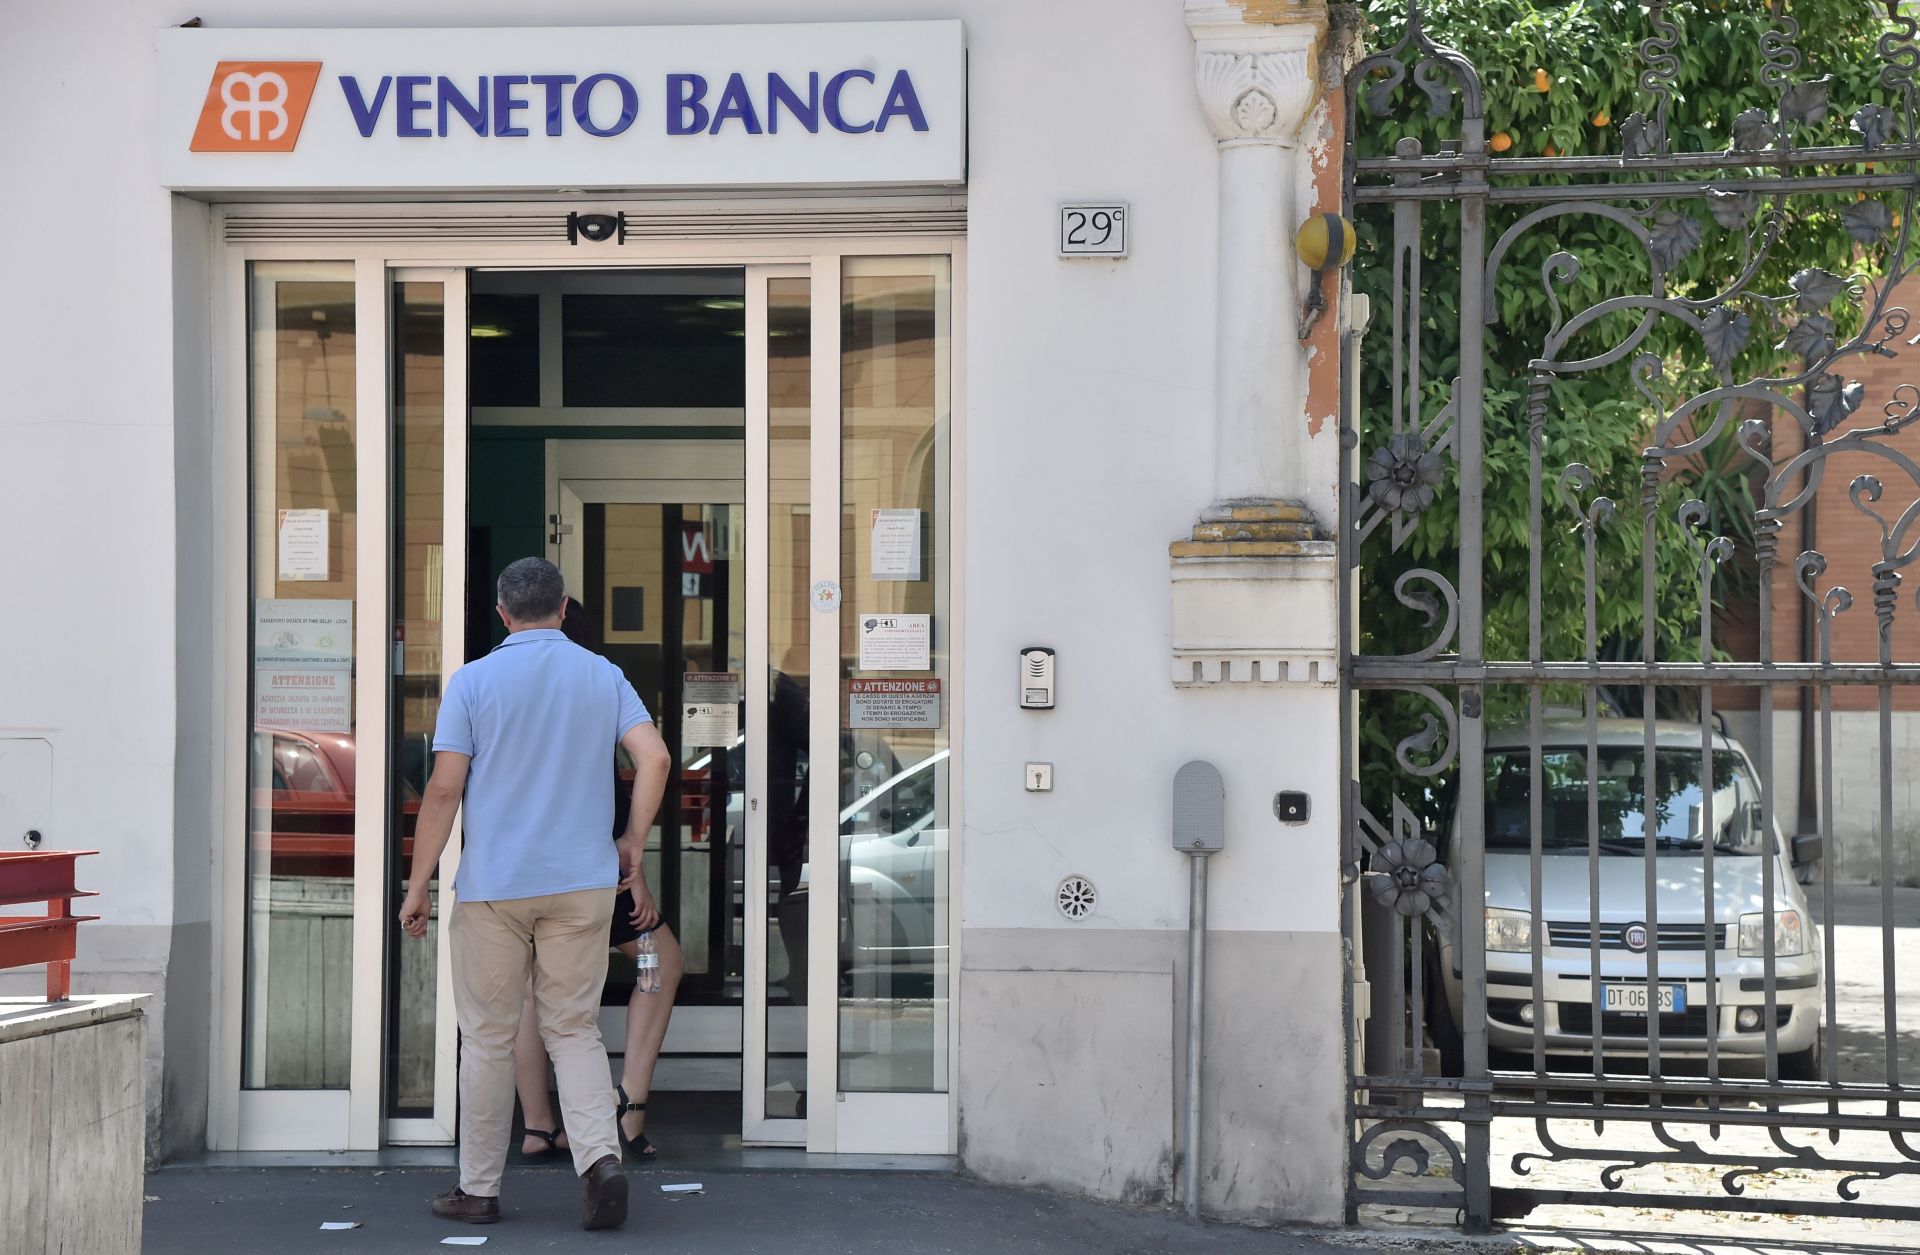 Veneto Banca and Banca Popolare di Vicenza's assets were consolidated over the weekend. It's the second time the European Union's new Banking Union rules have been tested in Italy.